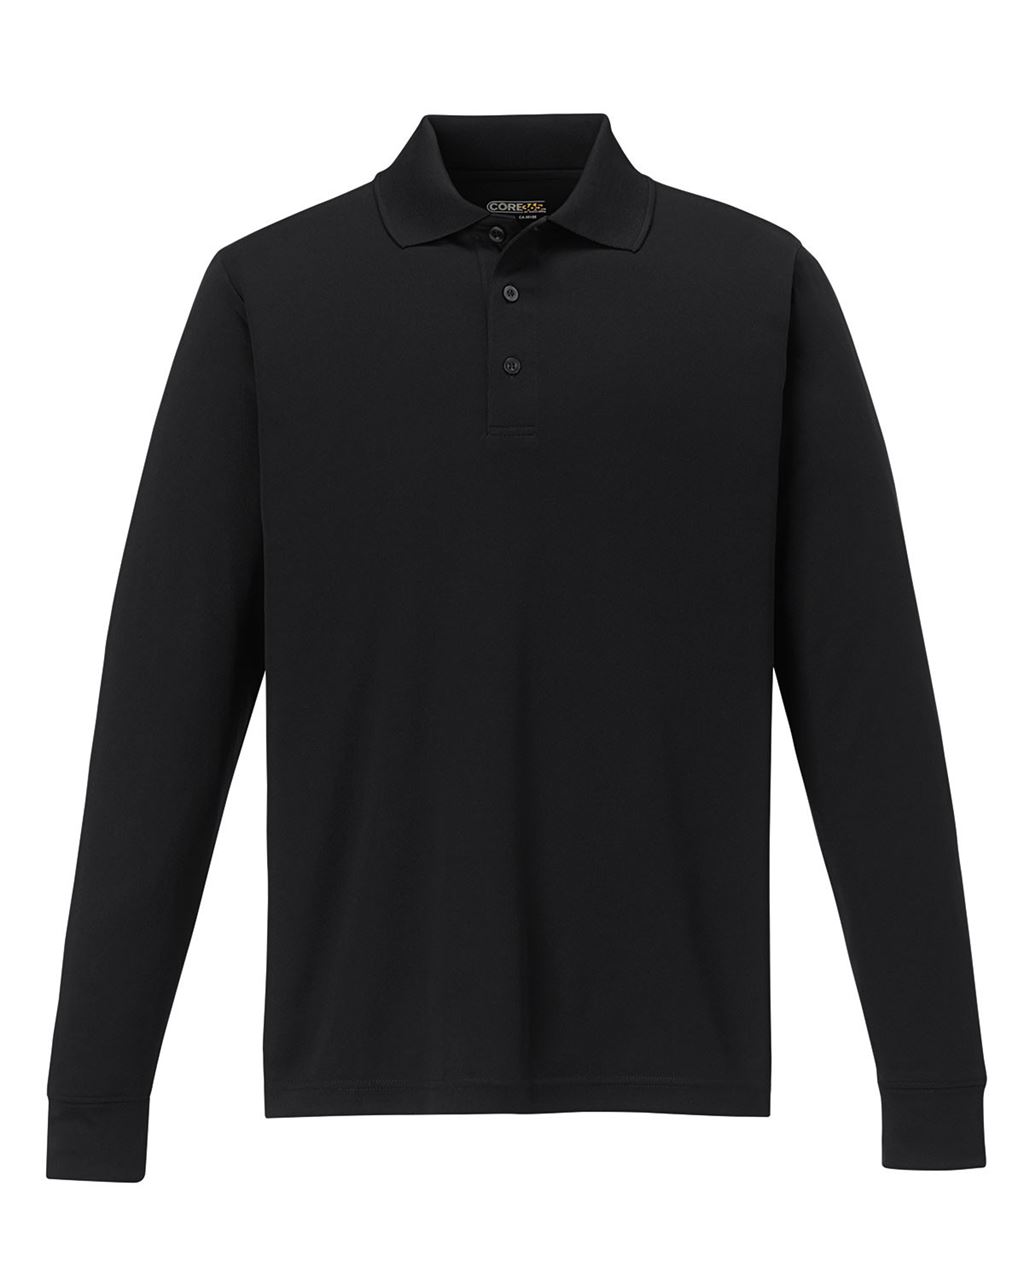 Picture of Core365 Men's Performance Long Sleeve Pique Polos